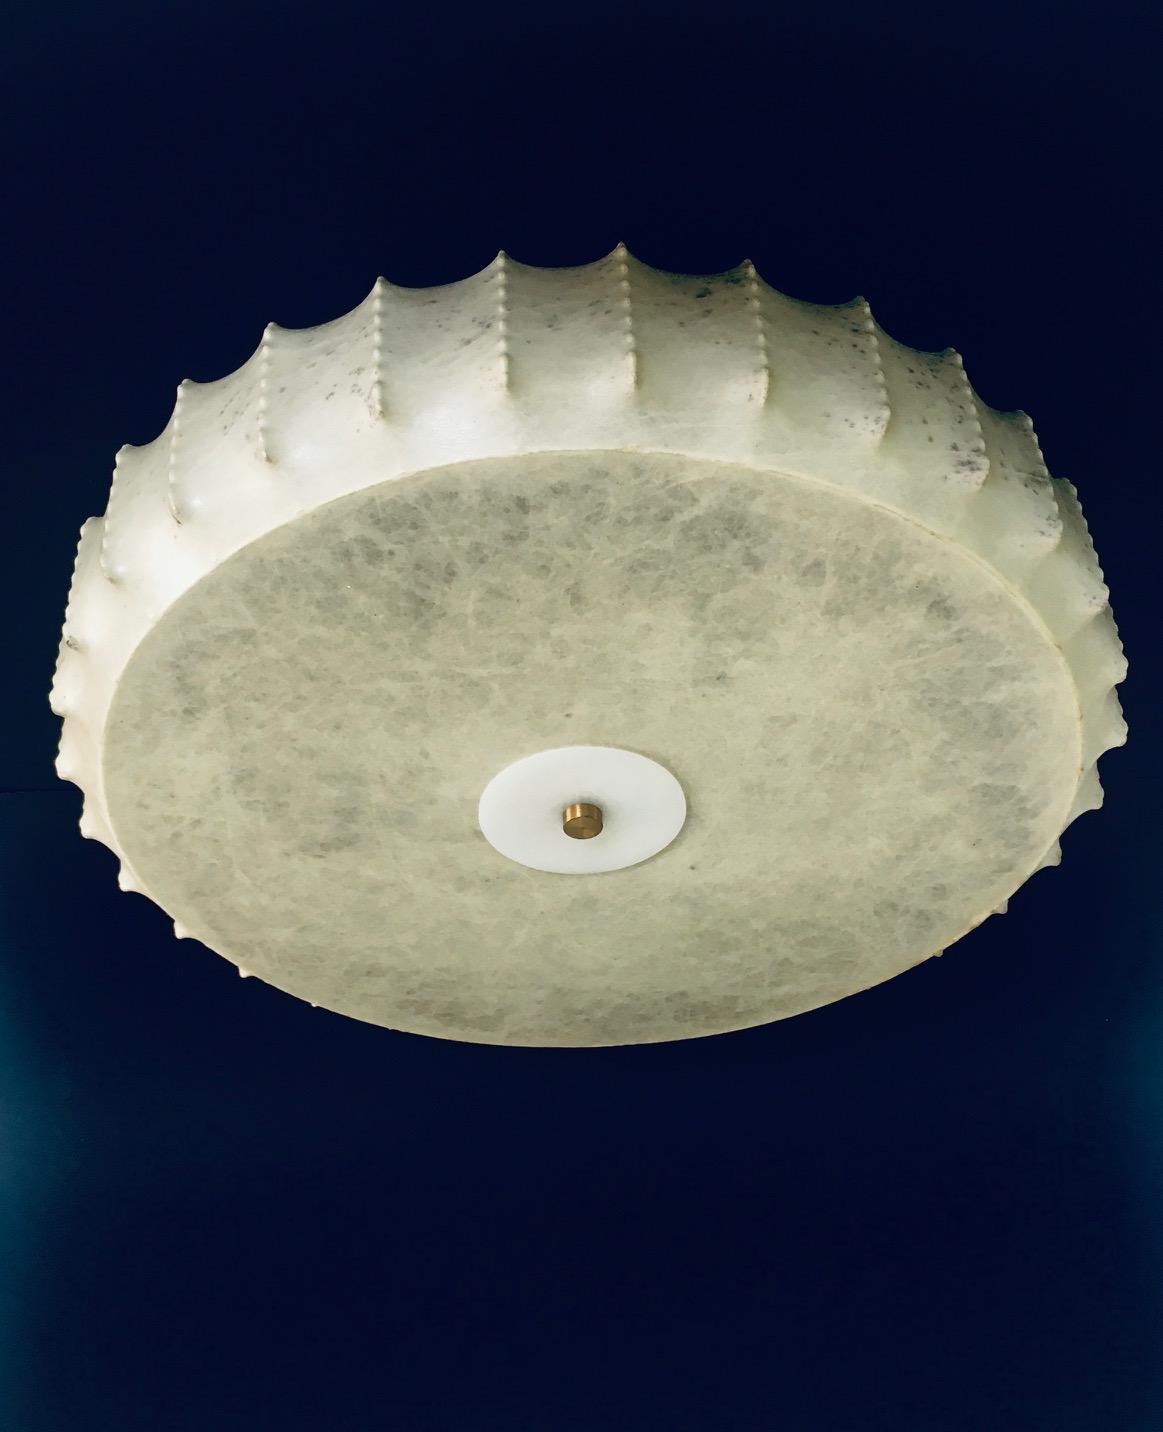 Vintage Midcentury Modern Design COCOON Ceiling or Wall Lamp by Goldkant Leuchten. Made in Germany, 1960's. In the style of Achille Castiglioni designer. Large model in very good condition. Has 4 light bulb fittings. Can be used as a flush mount